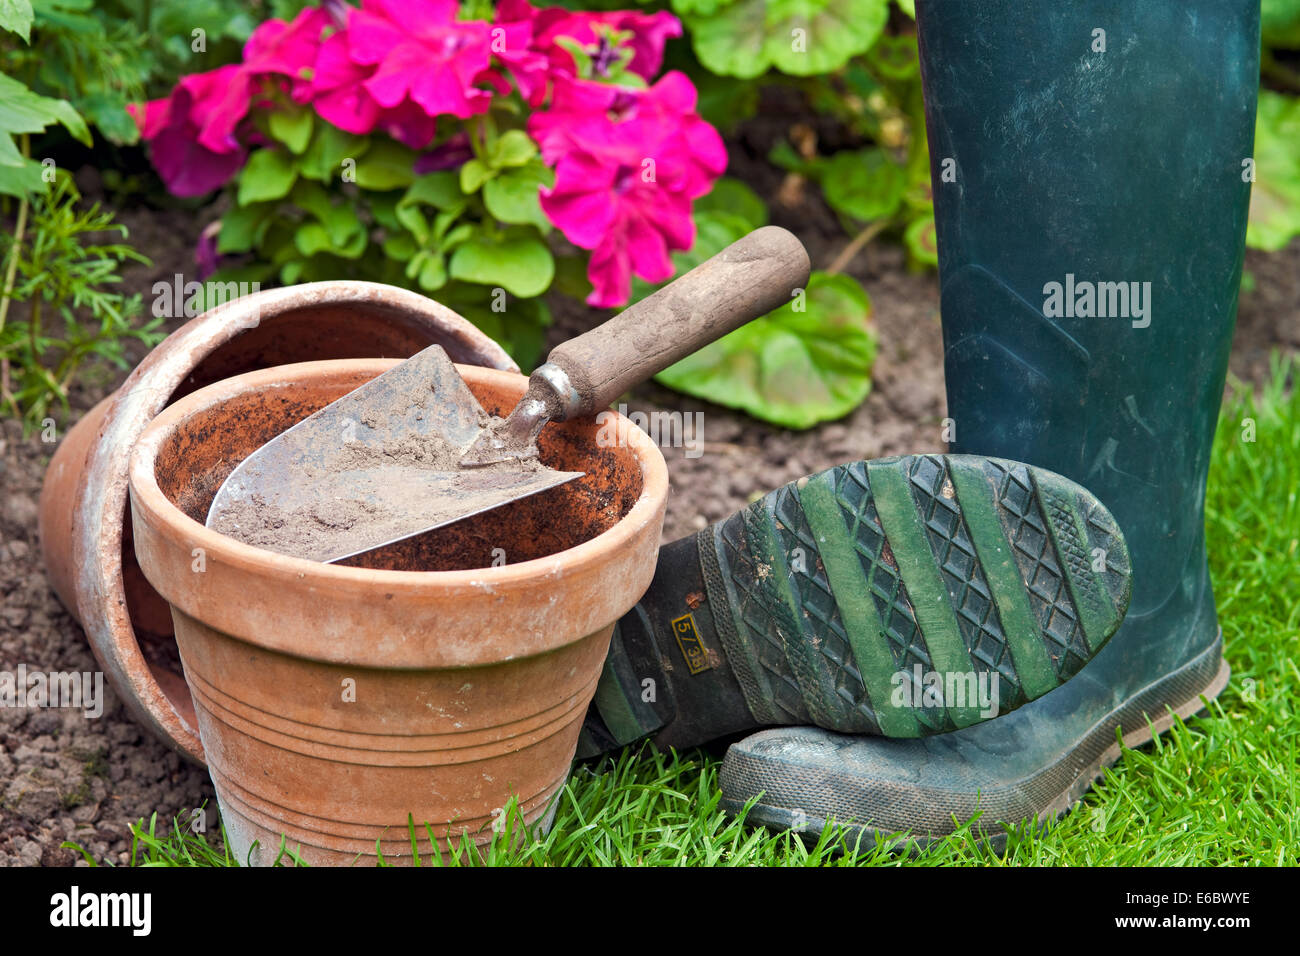 Close up of clay terracotta plant pots pot and a garden trowel England UK United Kingdom GB Great Britain Stock Photo